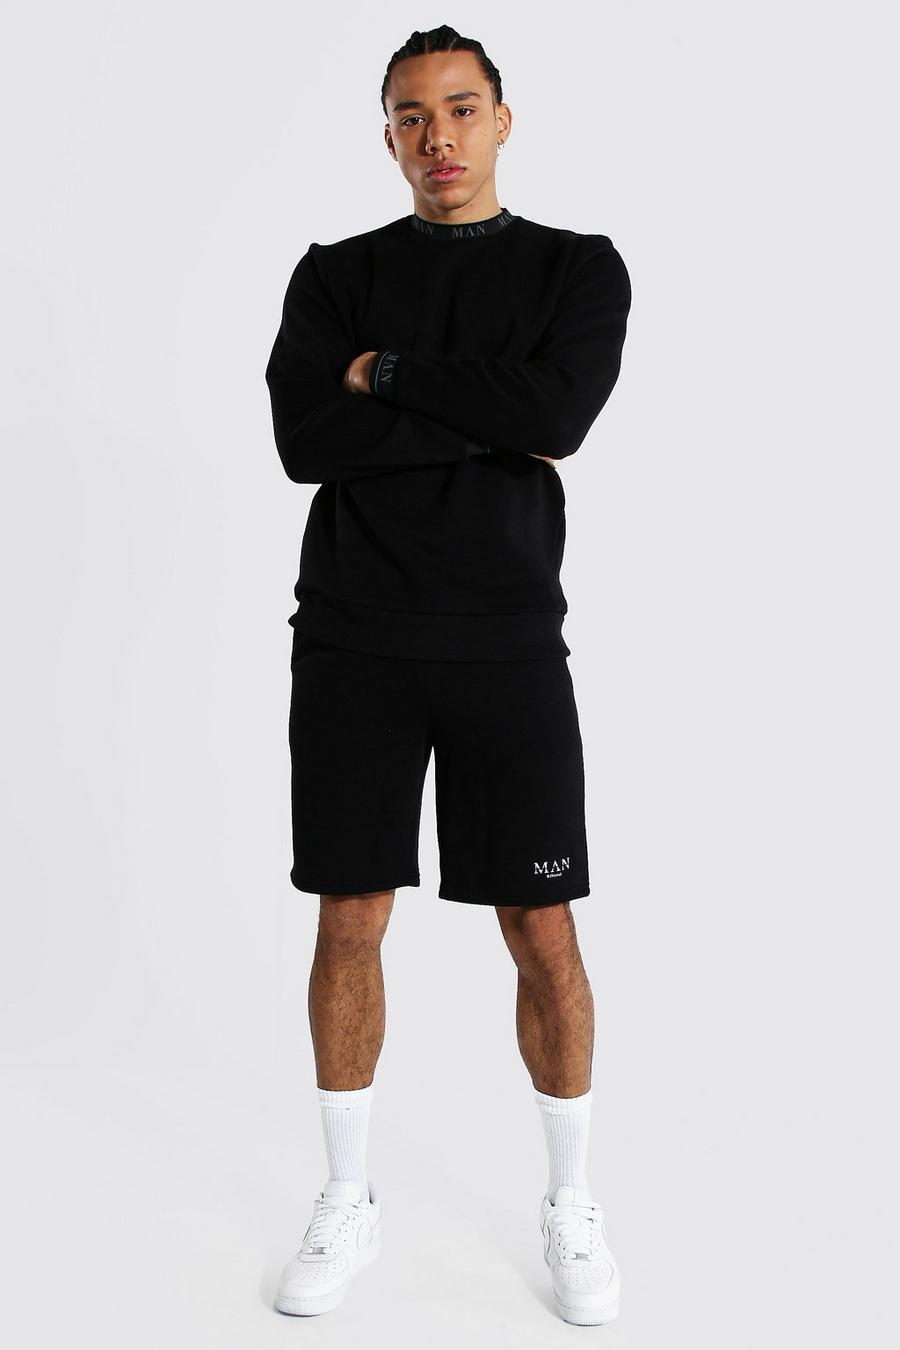 Black Tall Short Sweater Tracksuit With Man Rib image number 1